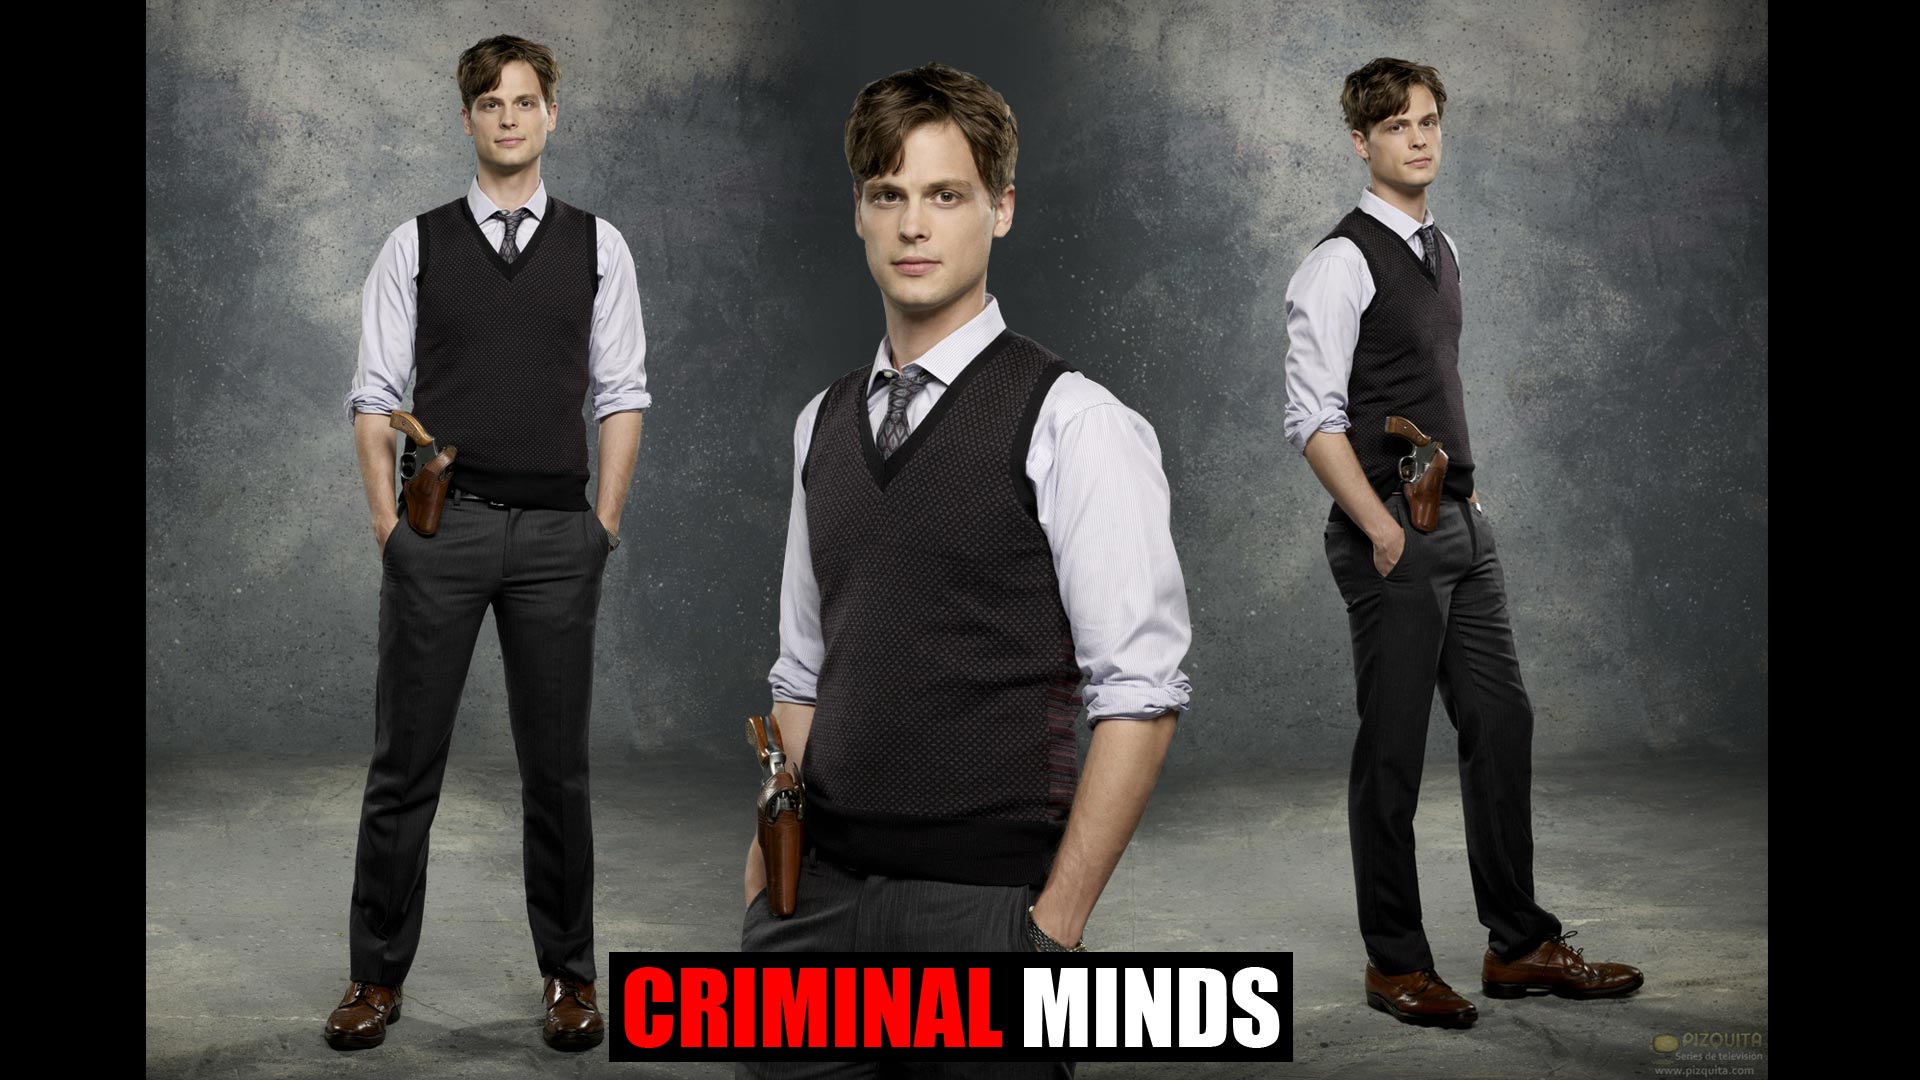  Show Criminal Minds Some New HD Images Pictures   All HD Wallpapers